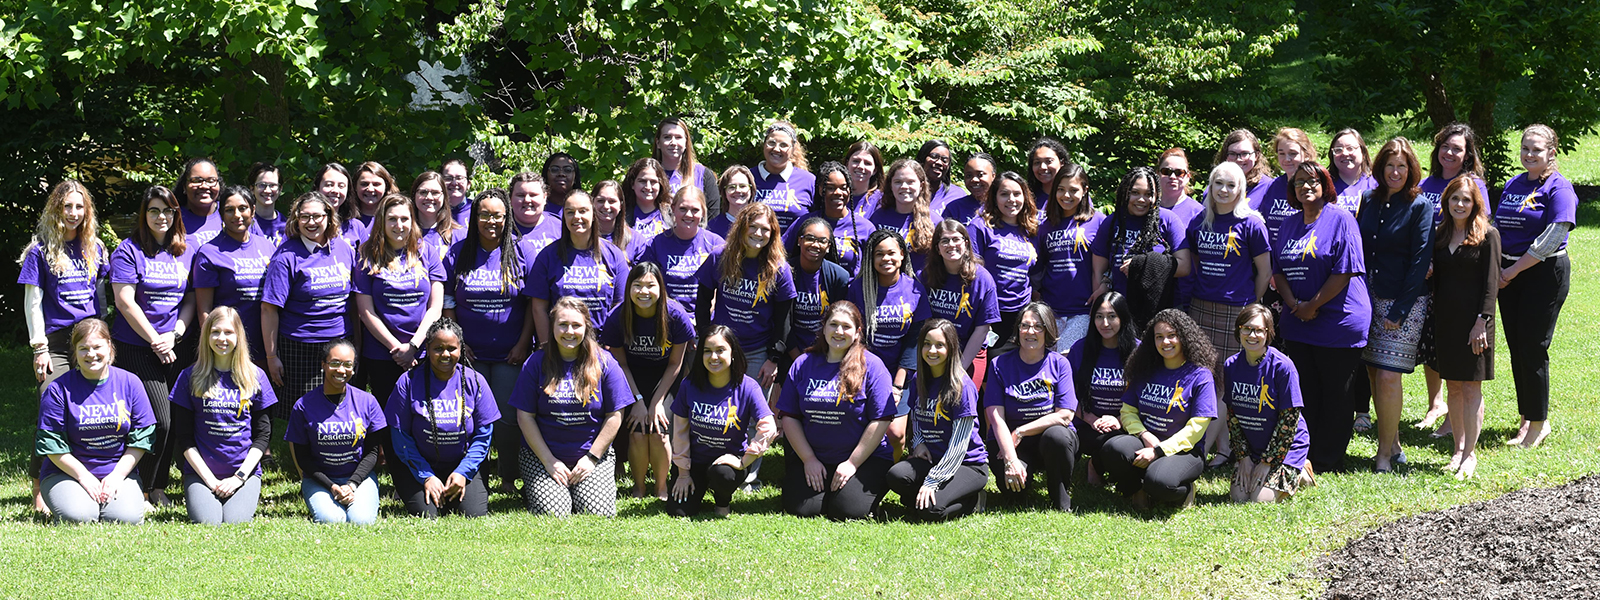 Photo of a large group of Chatham University students wearing purple New Leadership Program T-shirts, posing together outside on grass. 